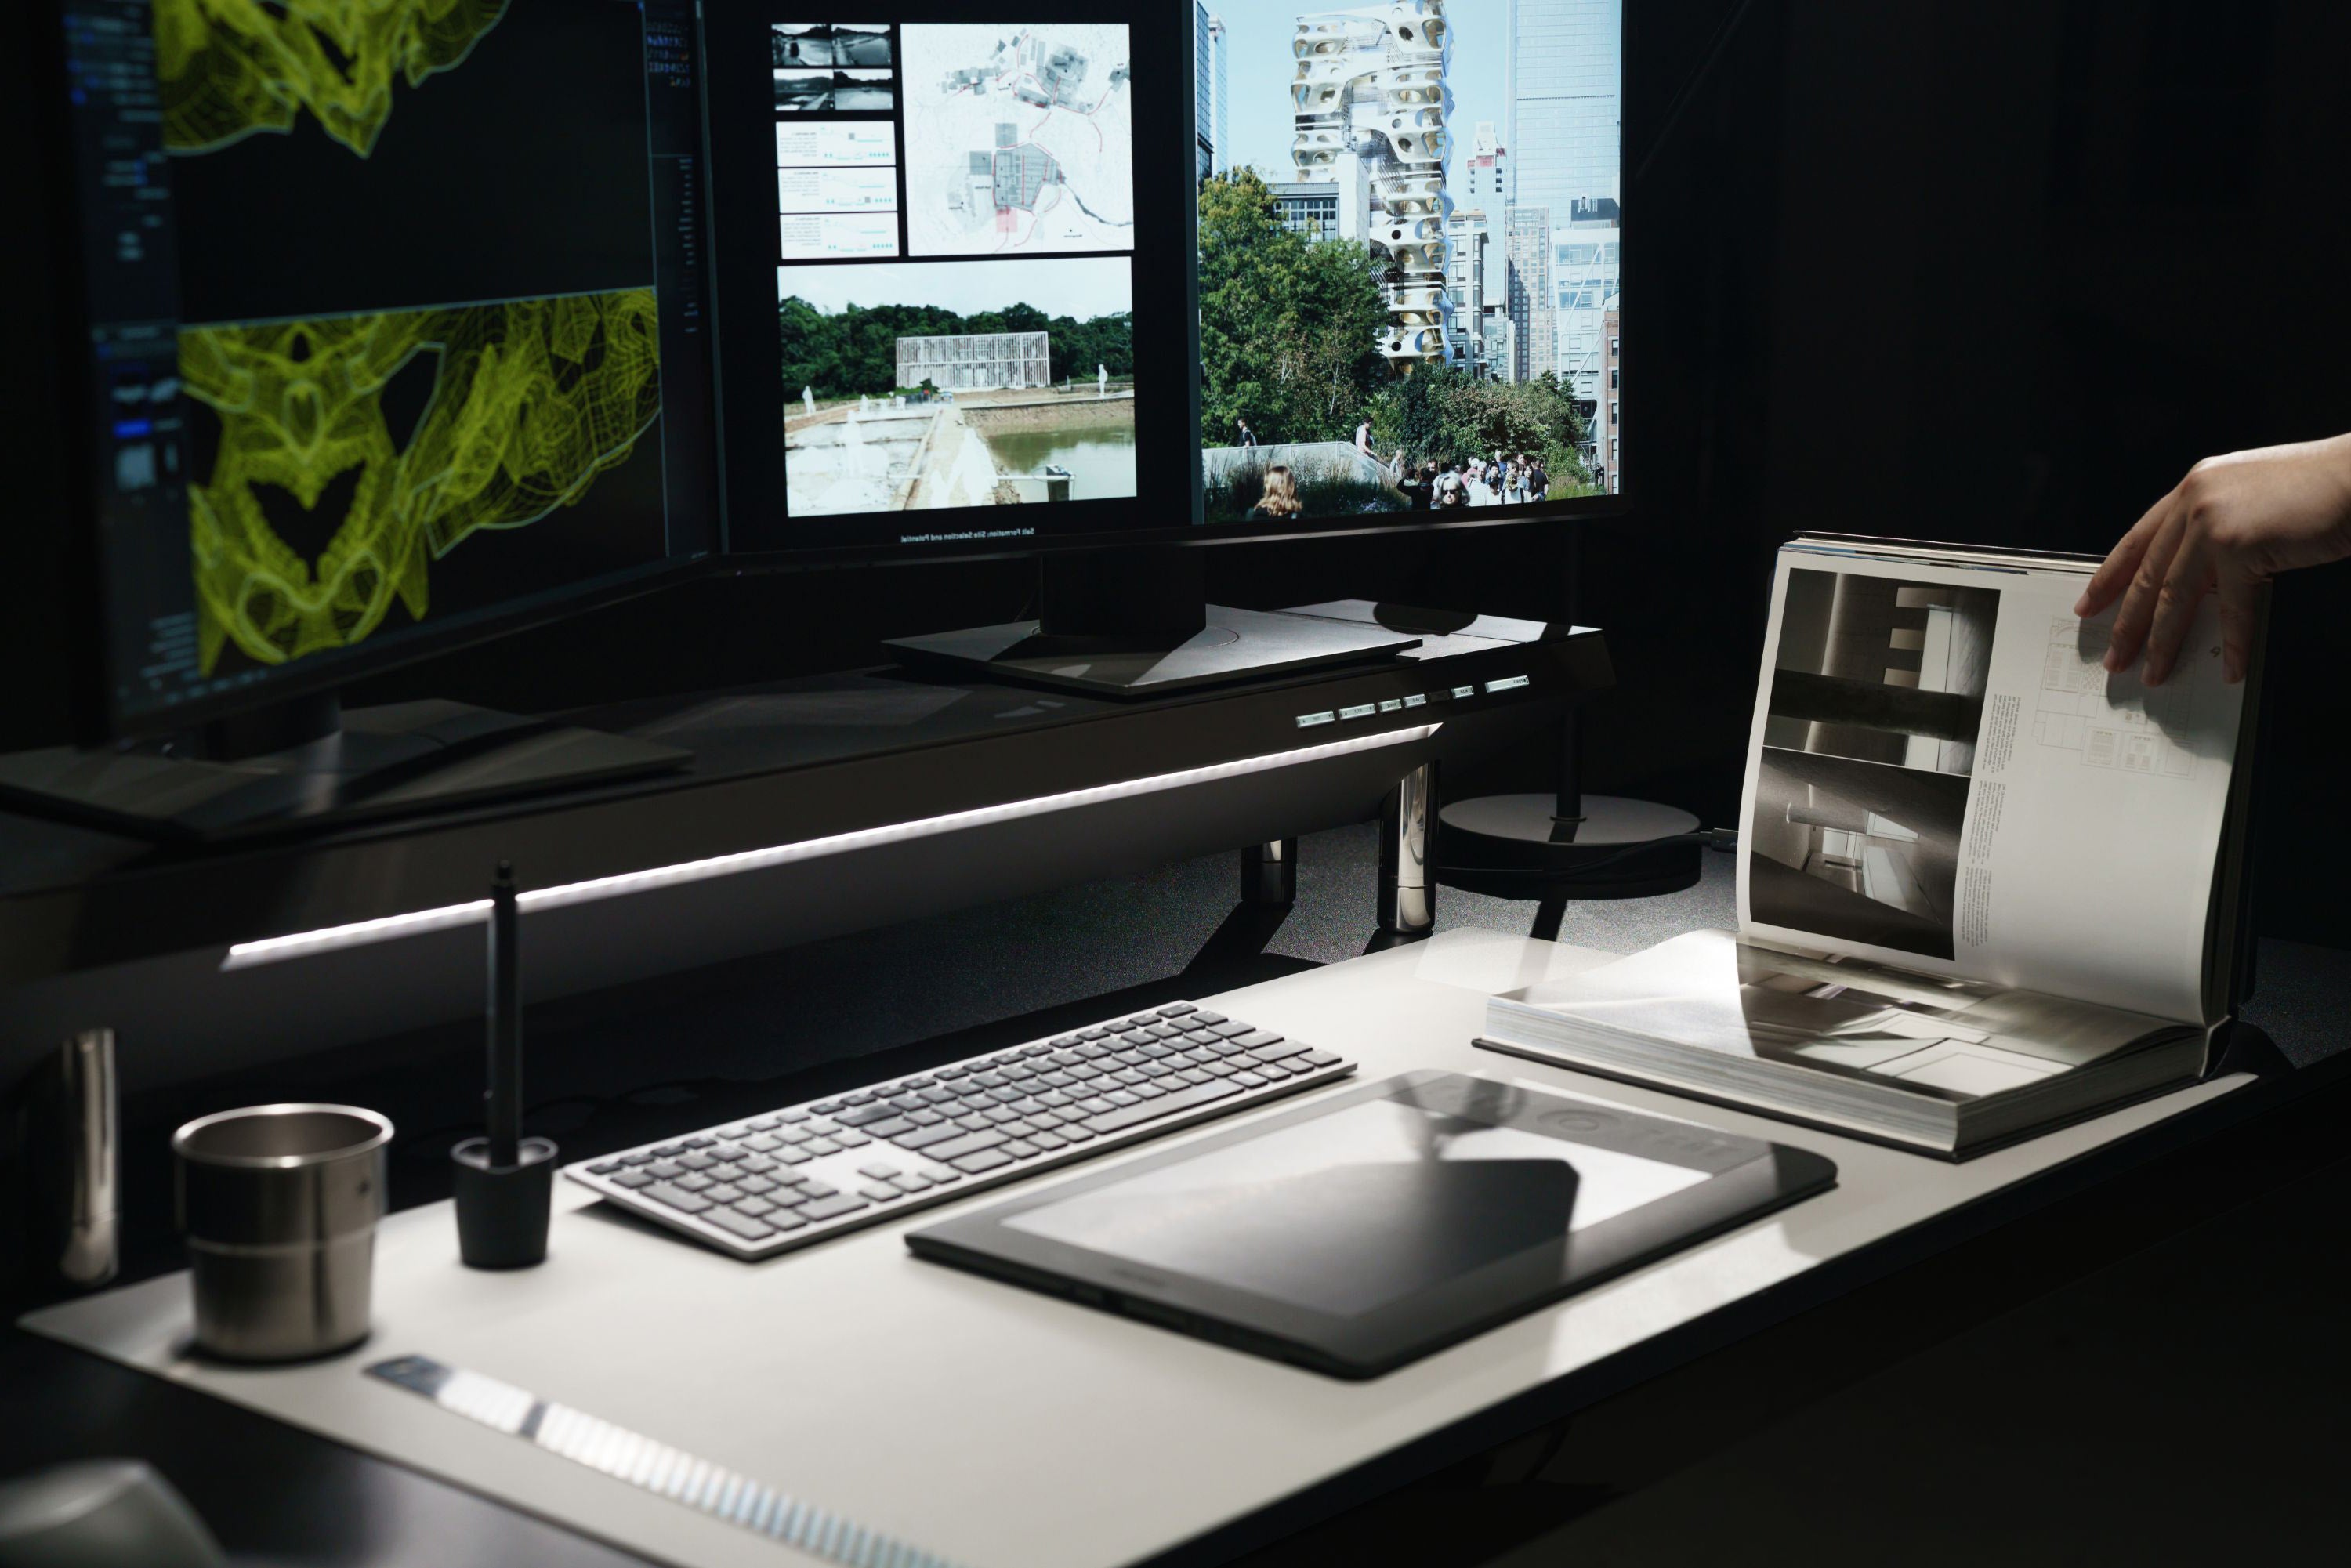 Hexcal Studio advanced all-in-1 workstation offers pro-level power